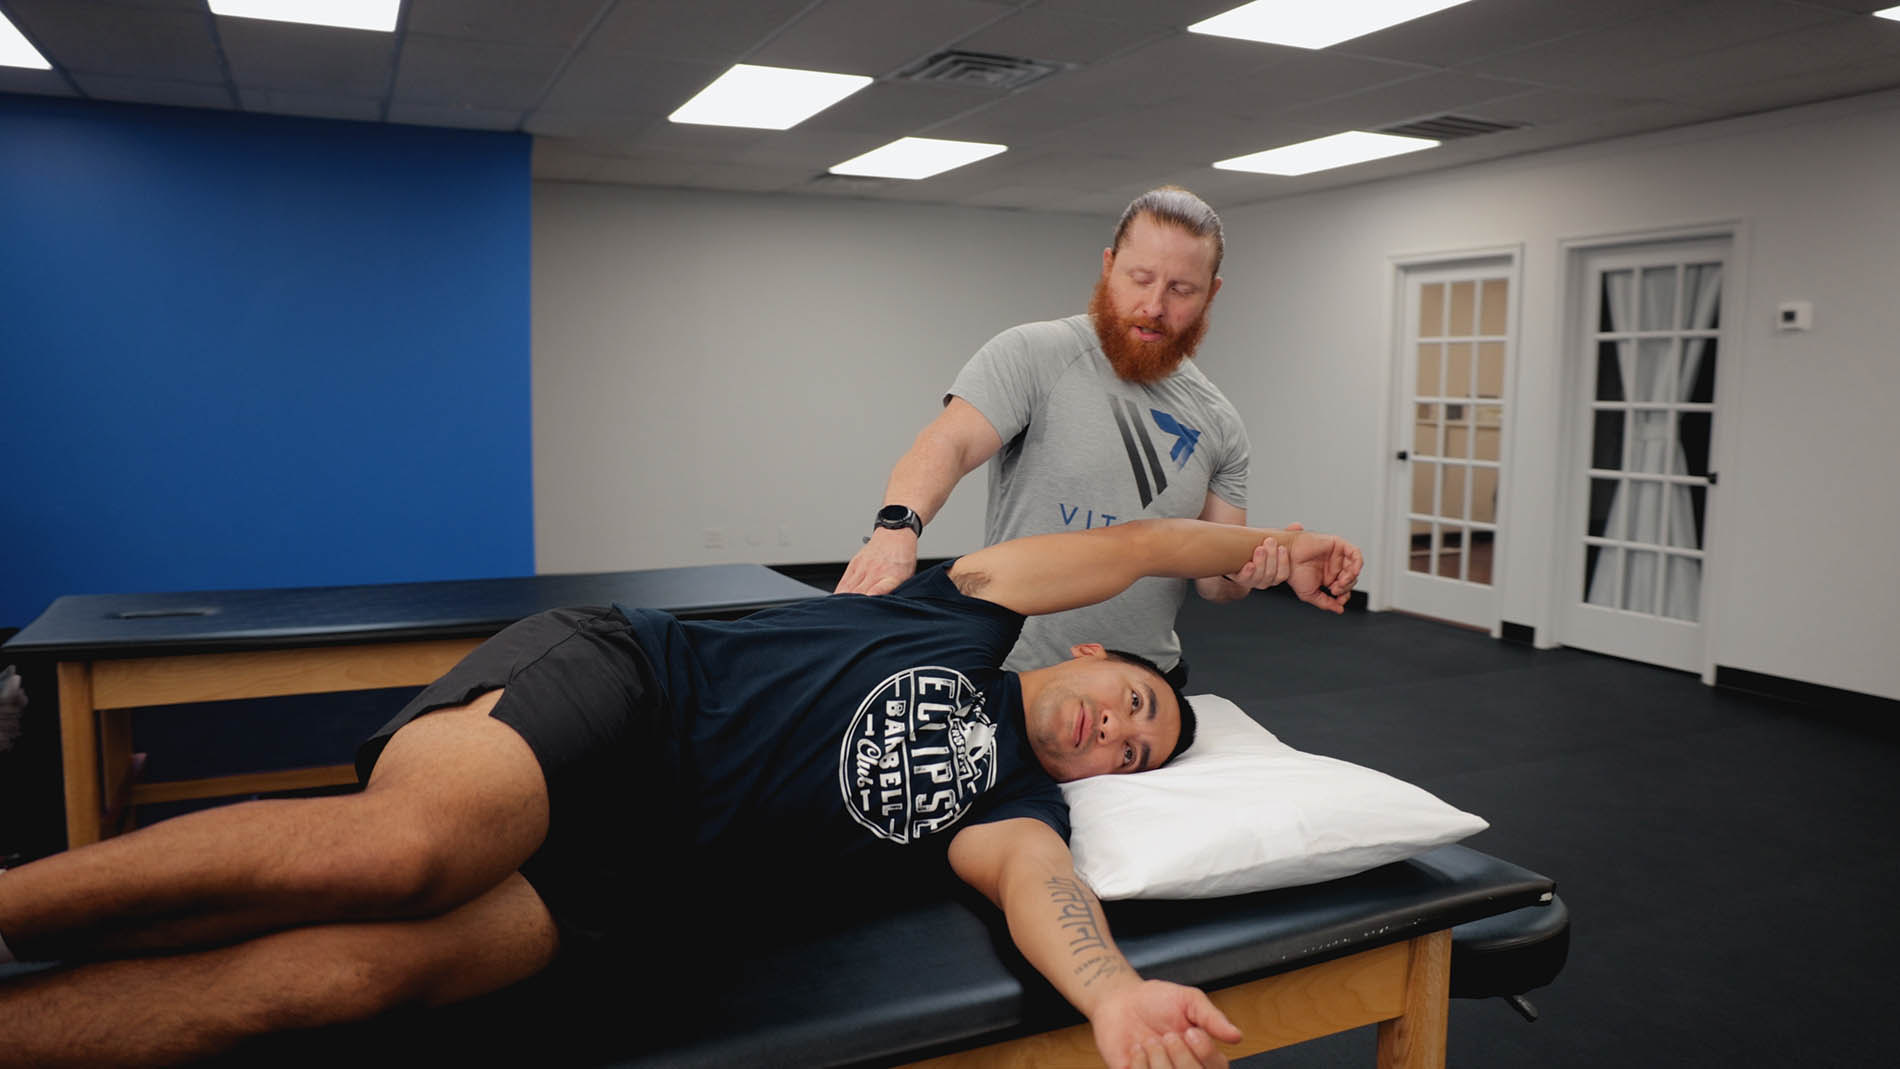 A physical therapist with a red beard is stretching the arm of a male patient lying on a treatment table, specializing in pelvic health, in a clinic with blue walls.